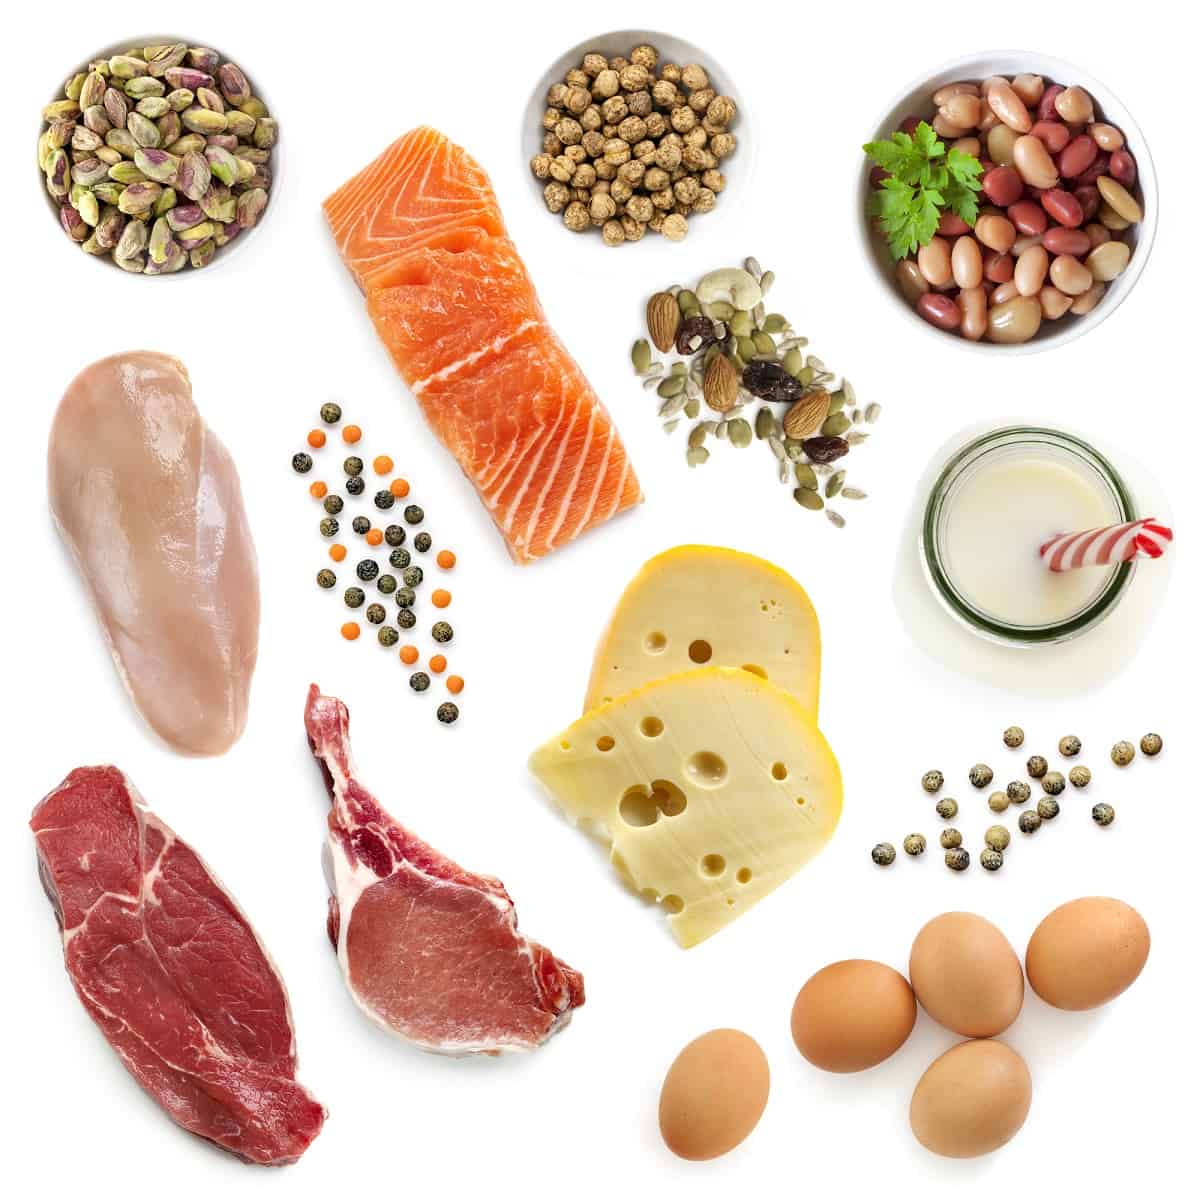 Assorted protein foods on a white backdrop including beef, chicken, fish, eggs, milk, and beans.